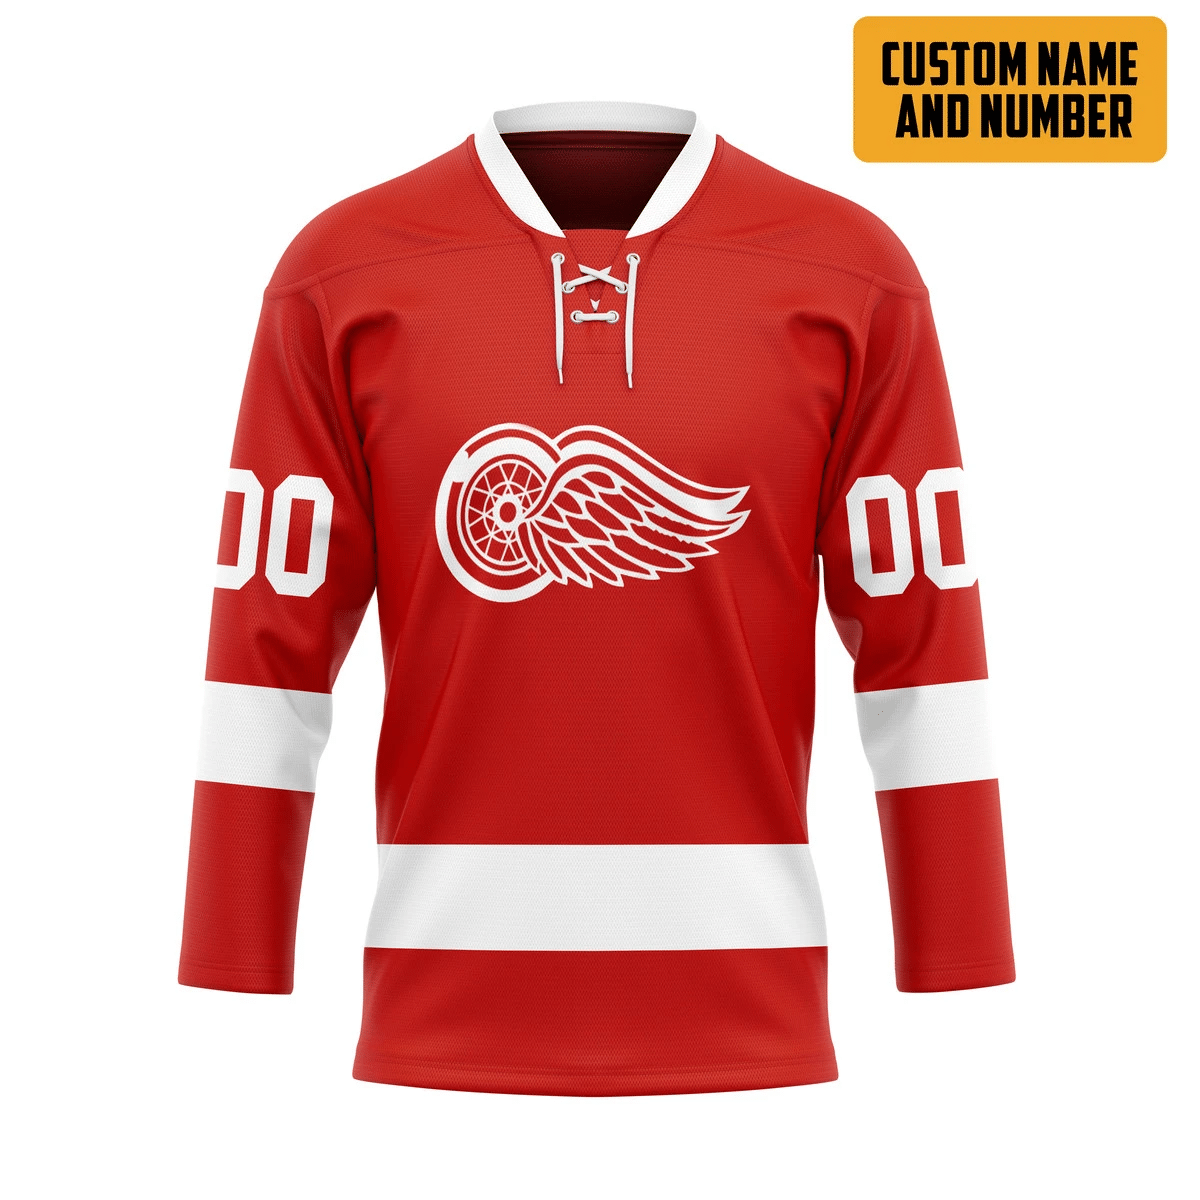 The hockey jersey is a must for every player in a team. 10